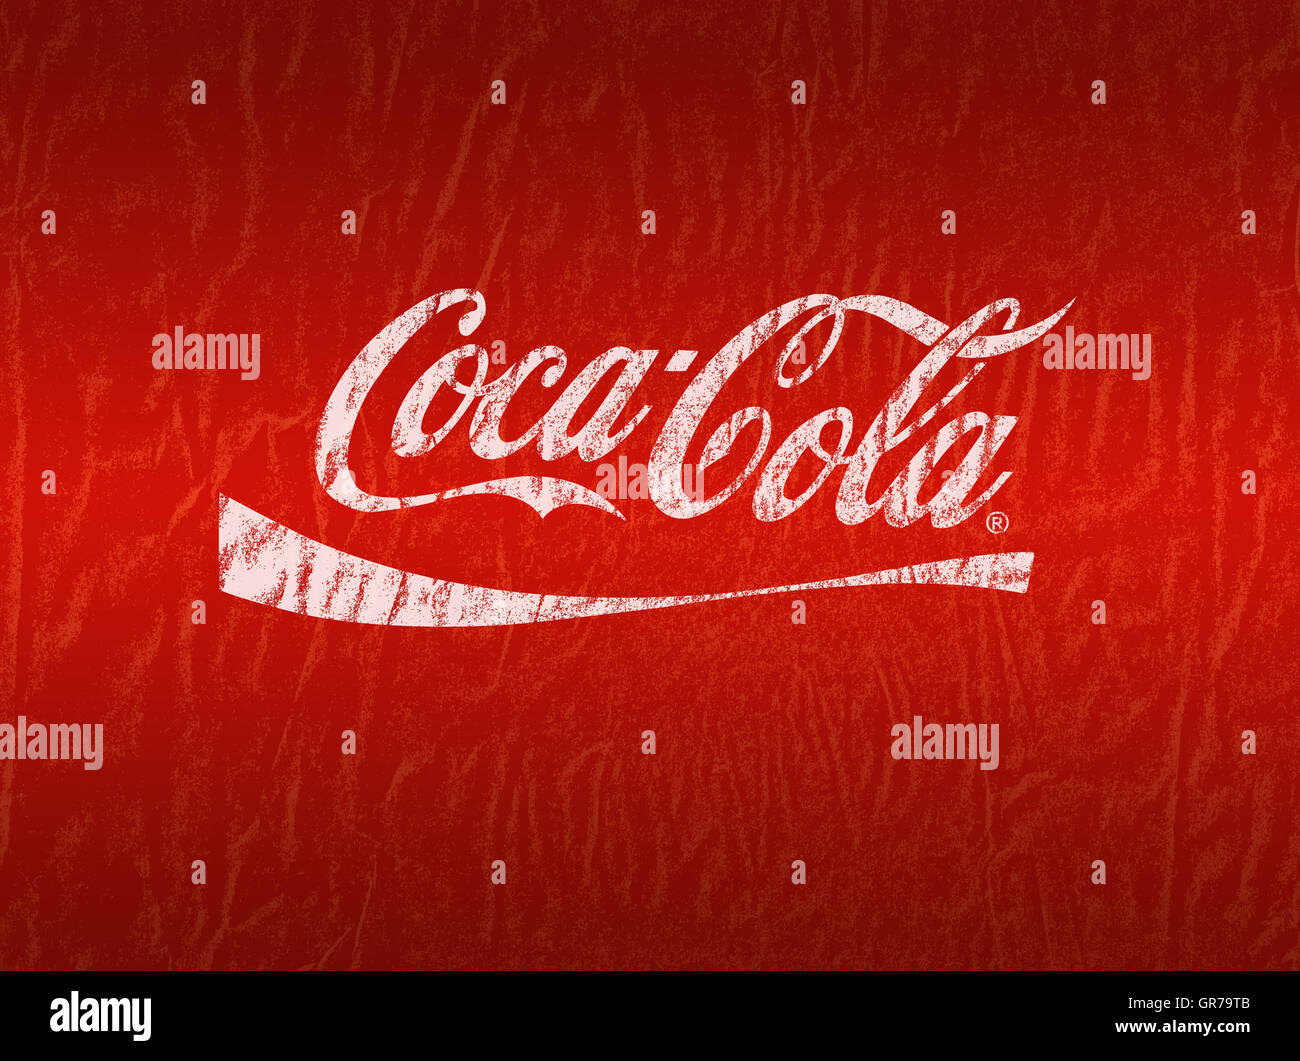 Illustration Of Grungy, Cracked Old Sign Of Coca Cola On Shabby Red Background Stock Photo